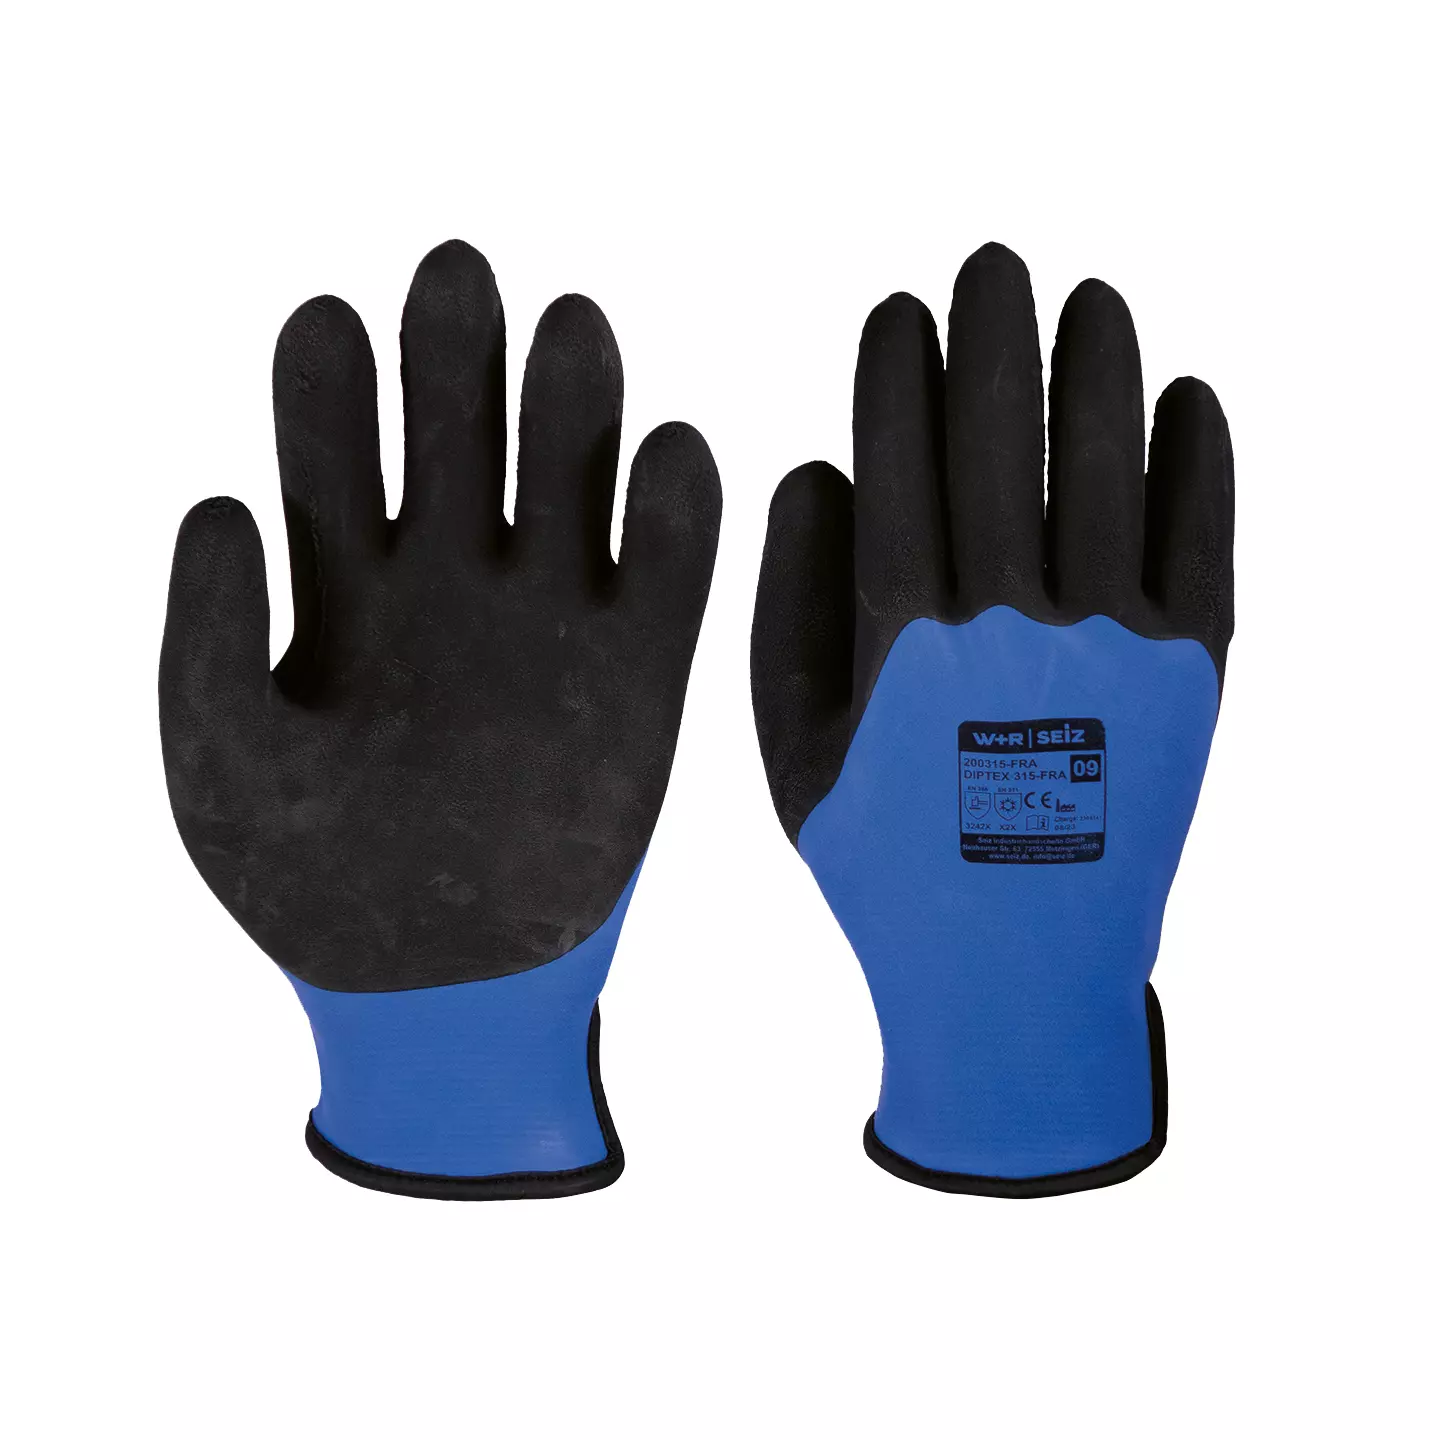 Cold protection glove Diptex 315, 5 pairs - 8